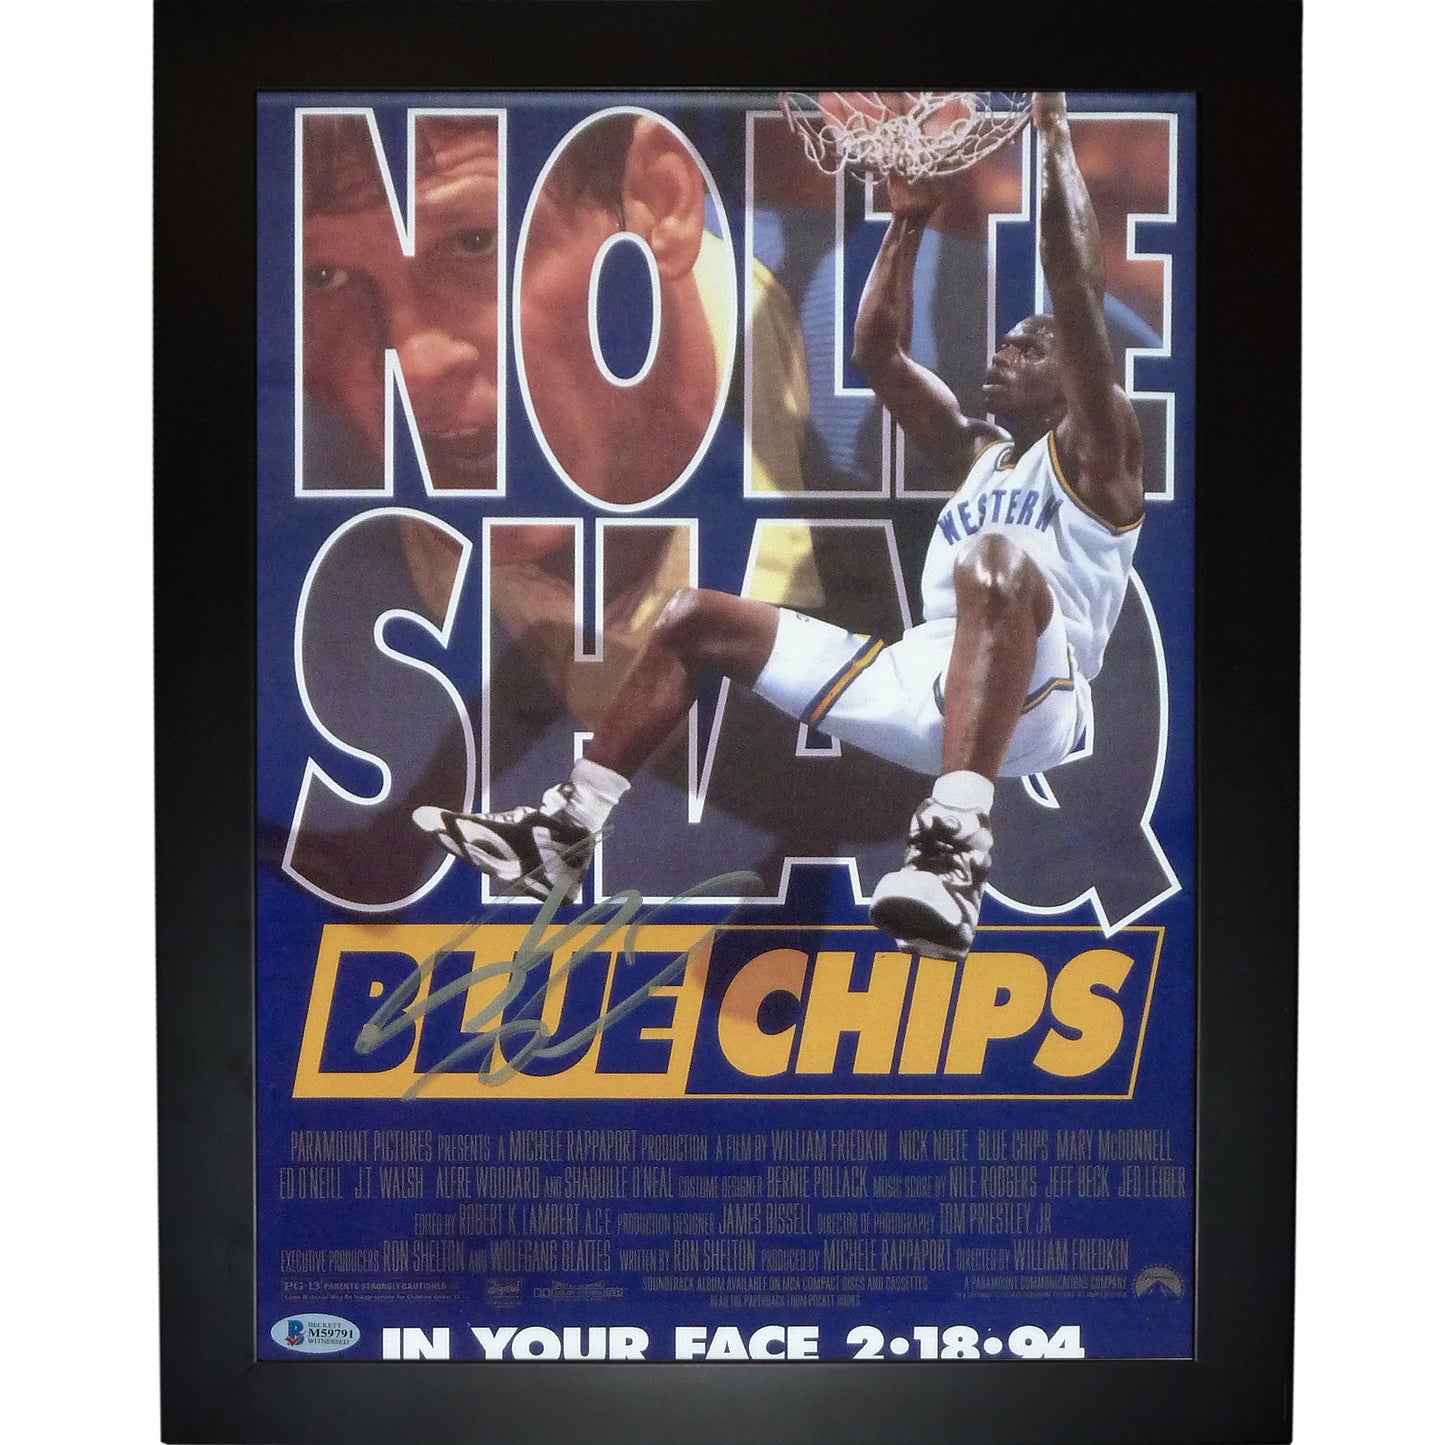 Shaquille O'Neal Autographed "Blue Chips" Framed 11x17 Framed Movie Poster - Beckett